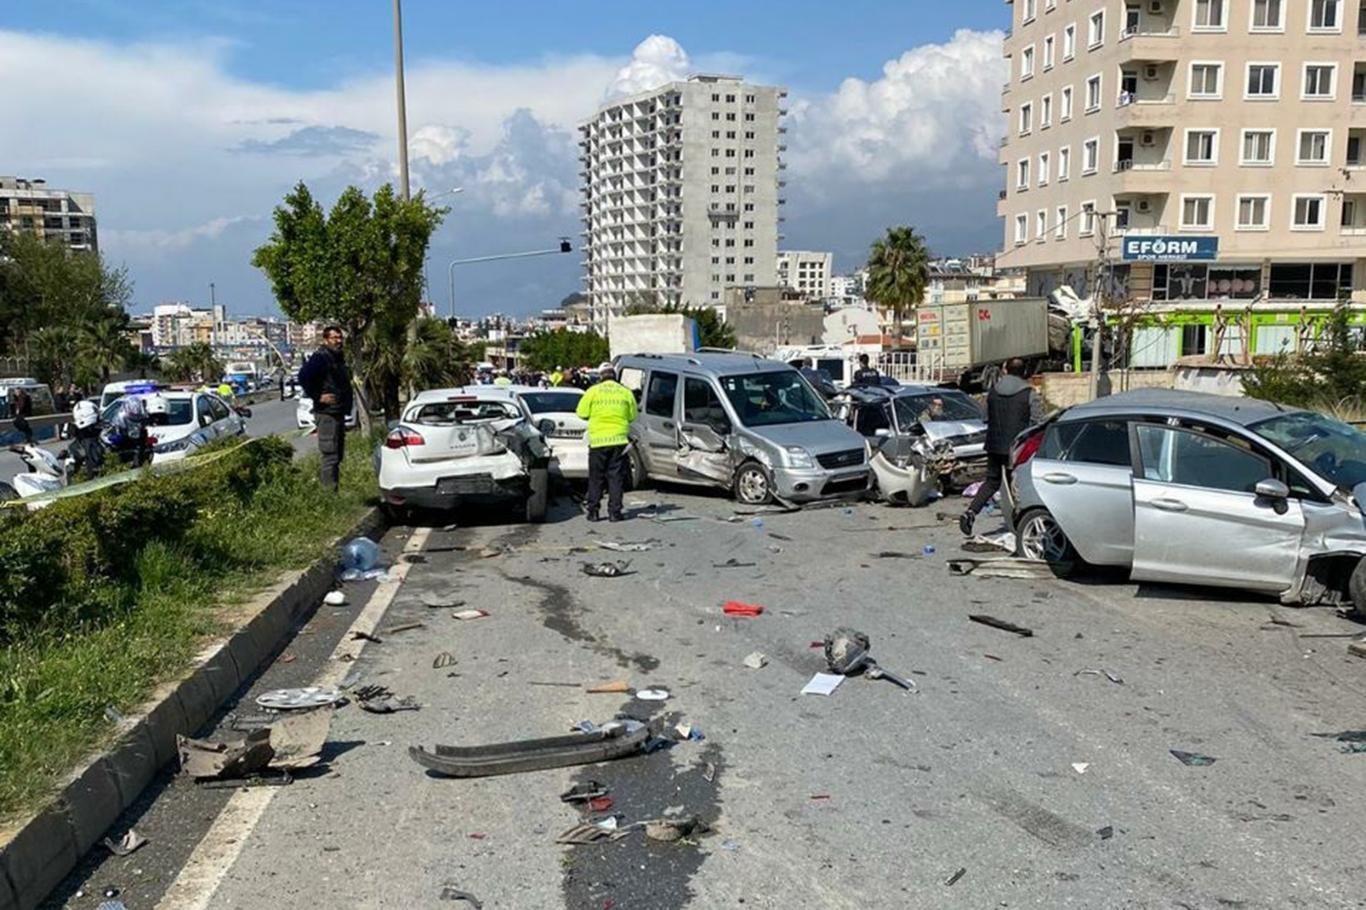 Road crash in southern Turkey: 5 people killed